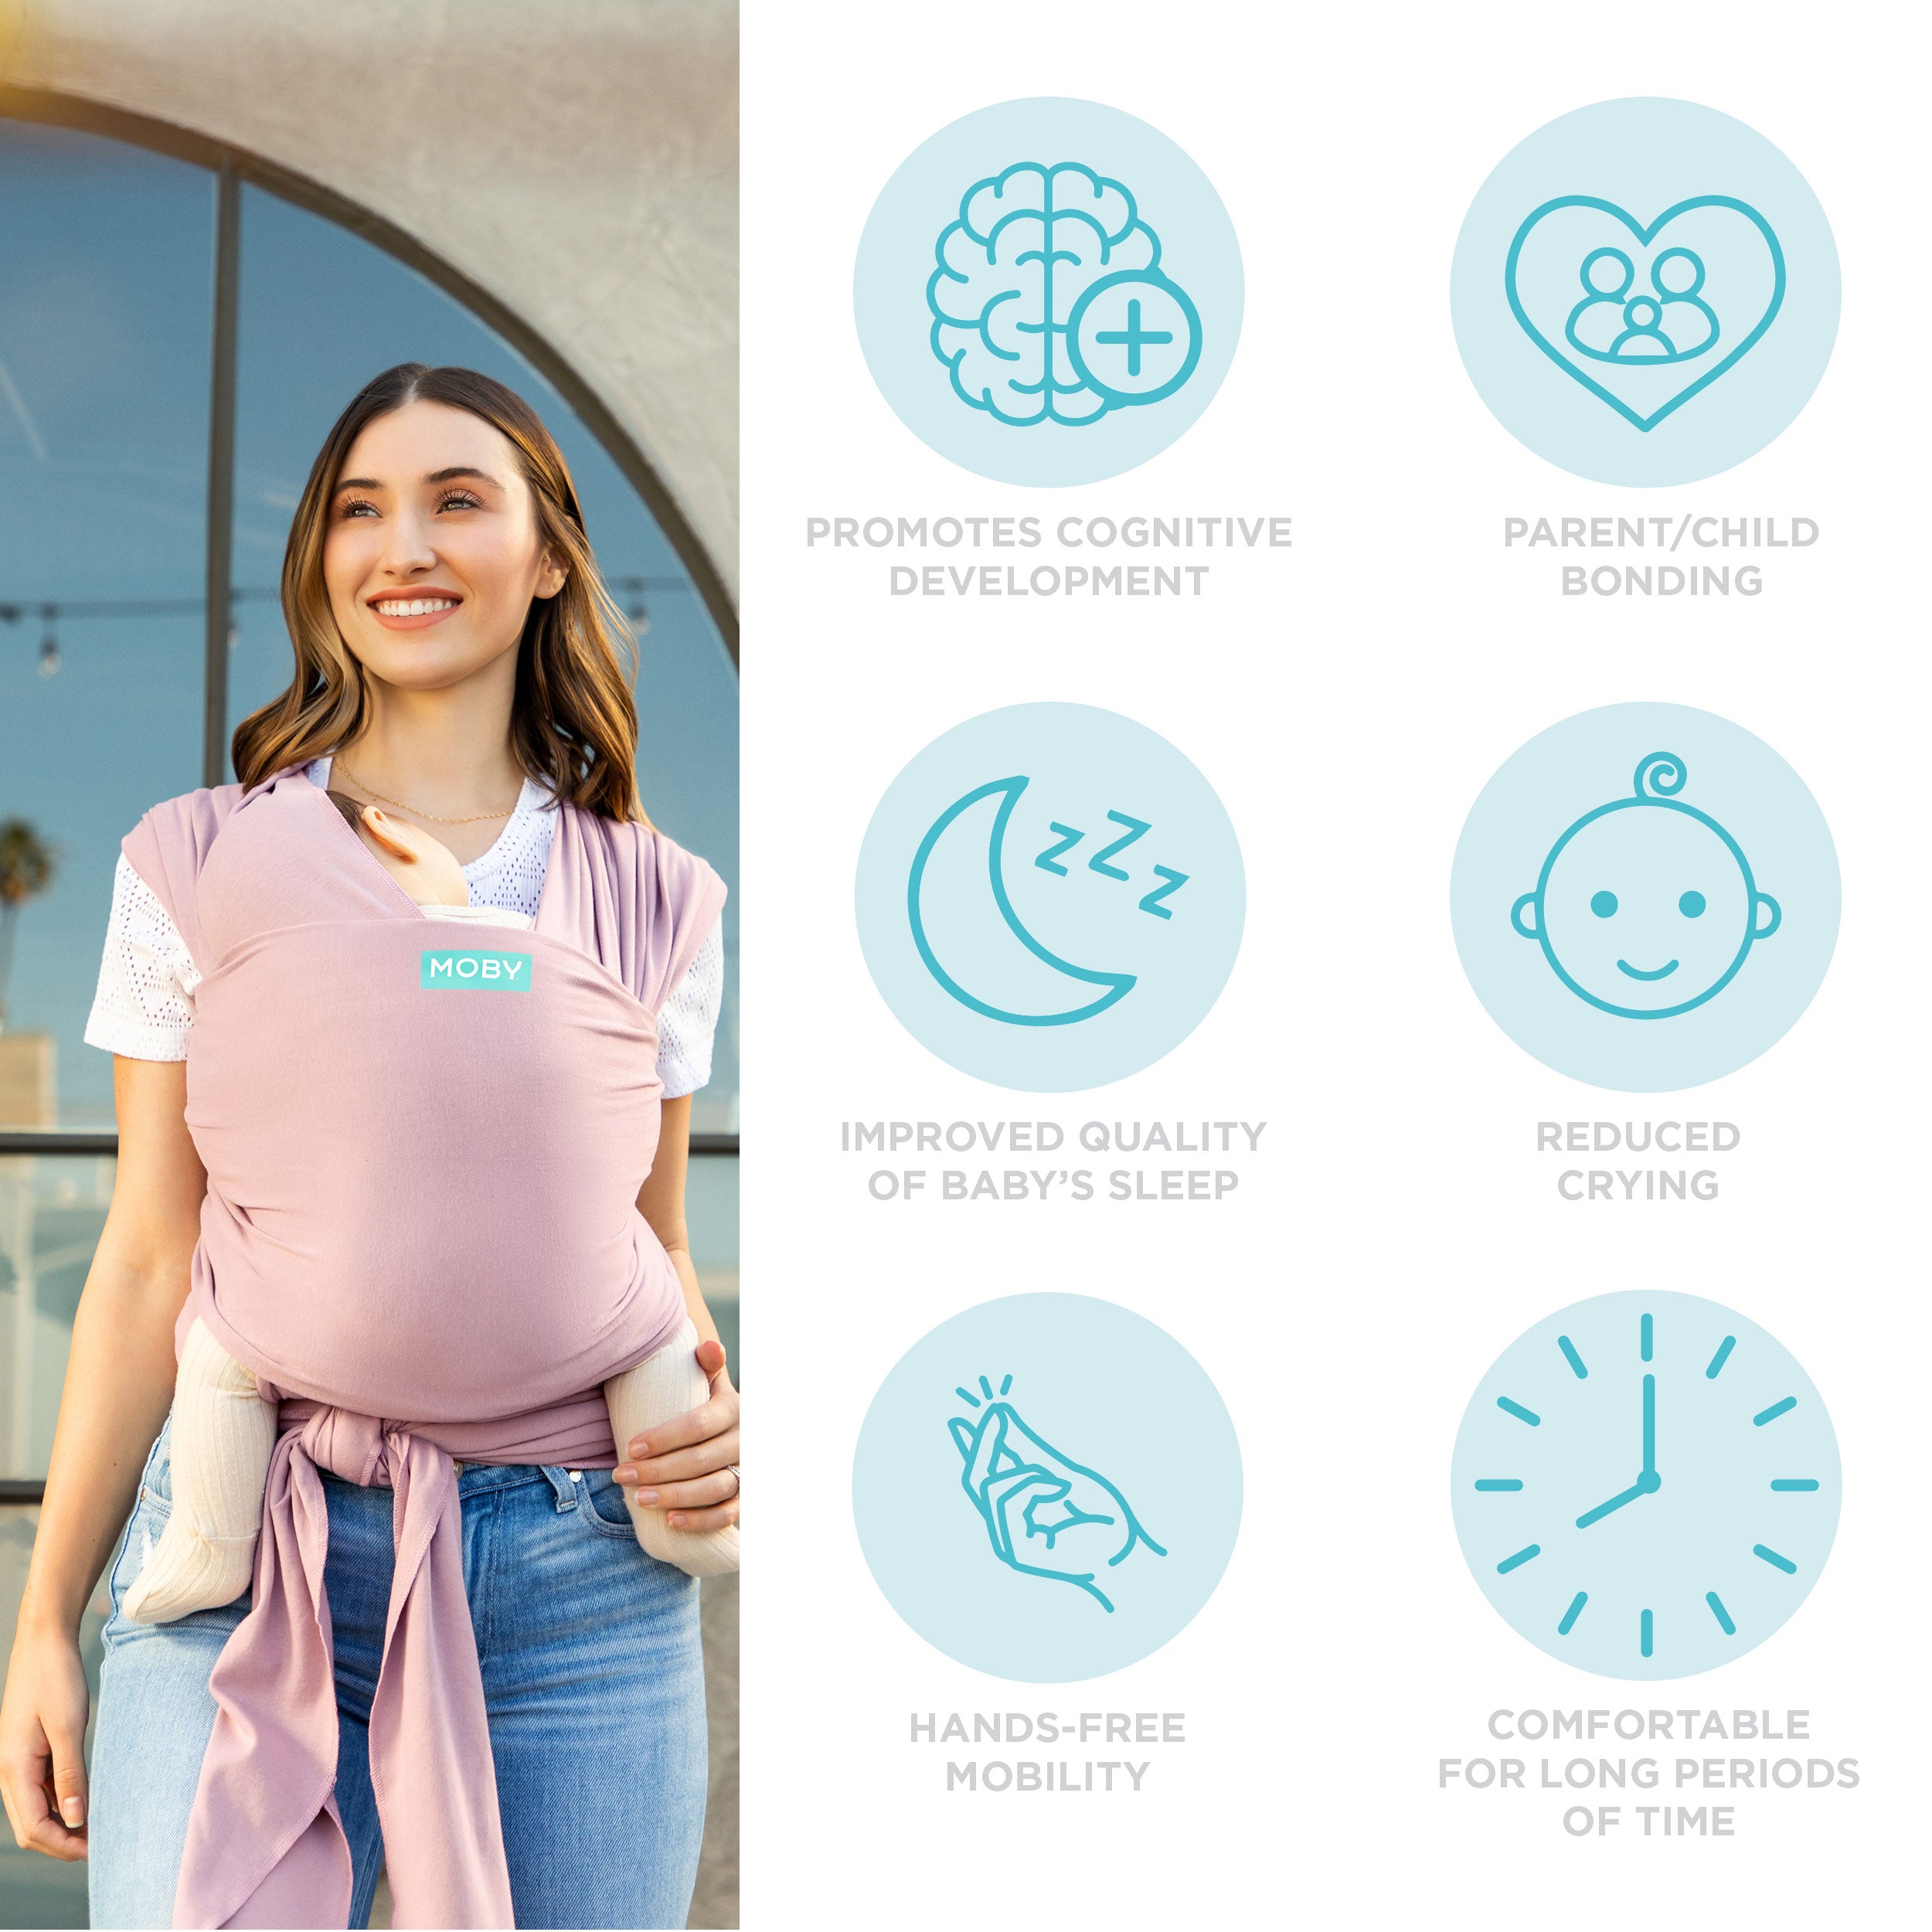 benefits of moby wrap infographic with small icons that read: promotes cognitive development. parent/child bonding, improved quality of sleep, reduces crying, hands free mobility, comfortable for long periods of time